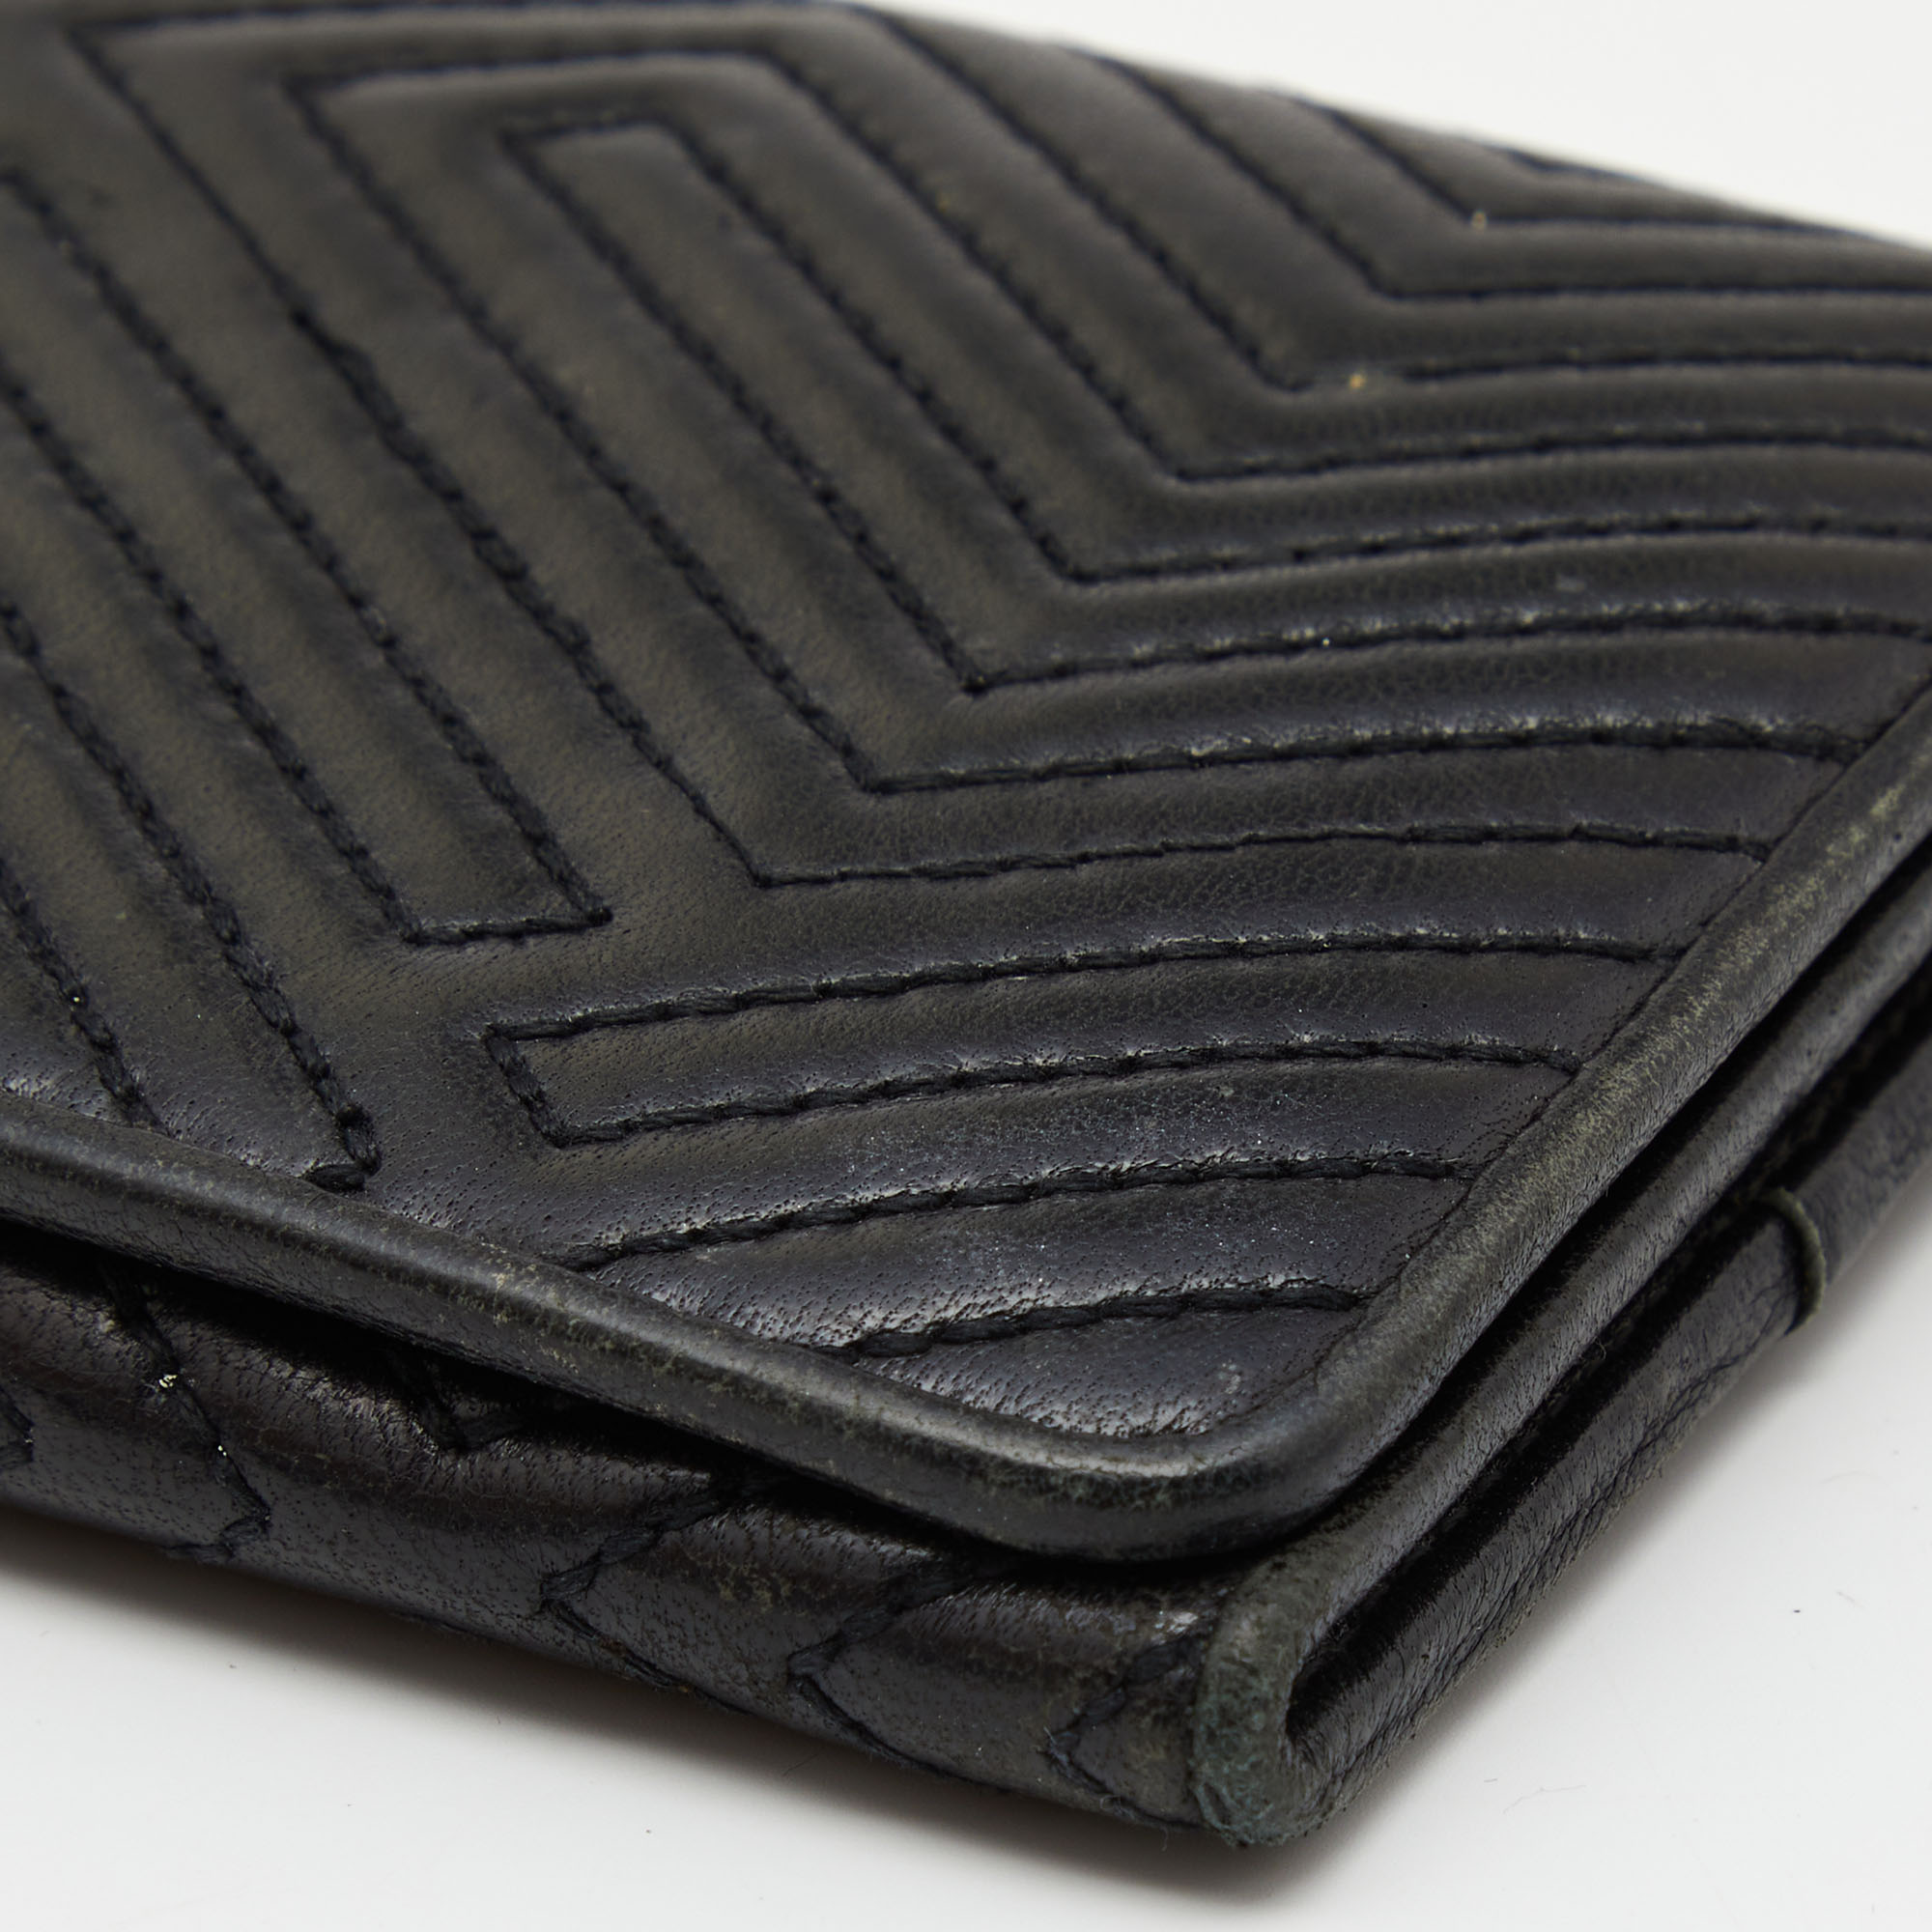 Bally Black Quilted Leather Continental Wallet